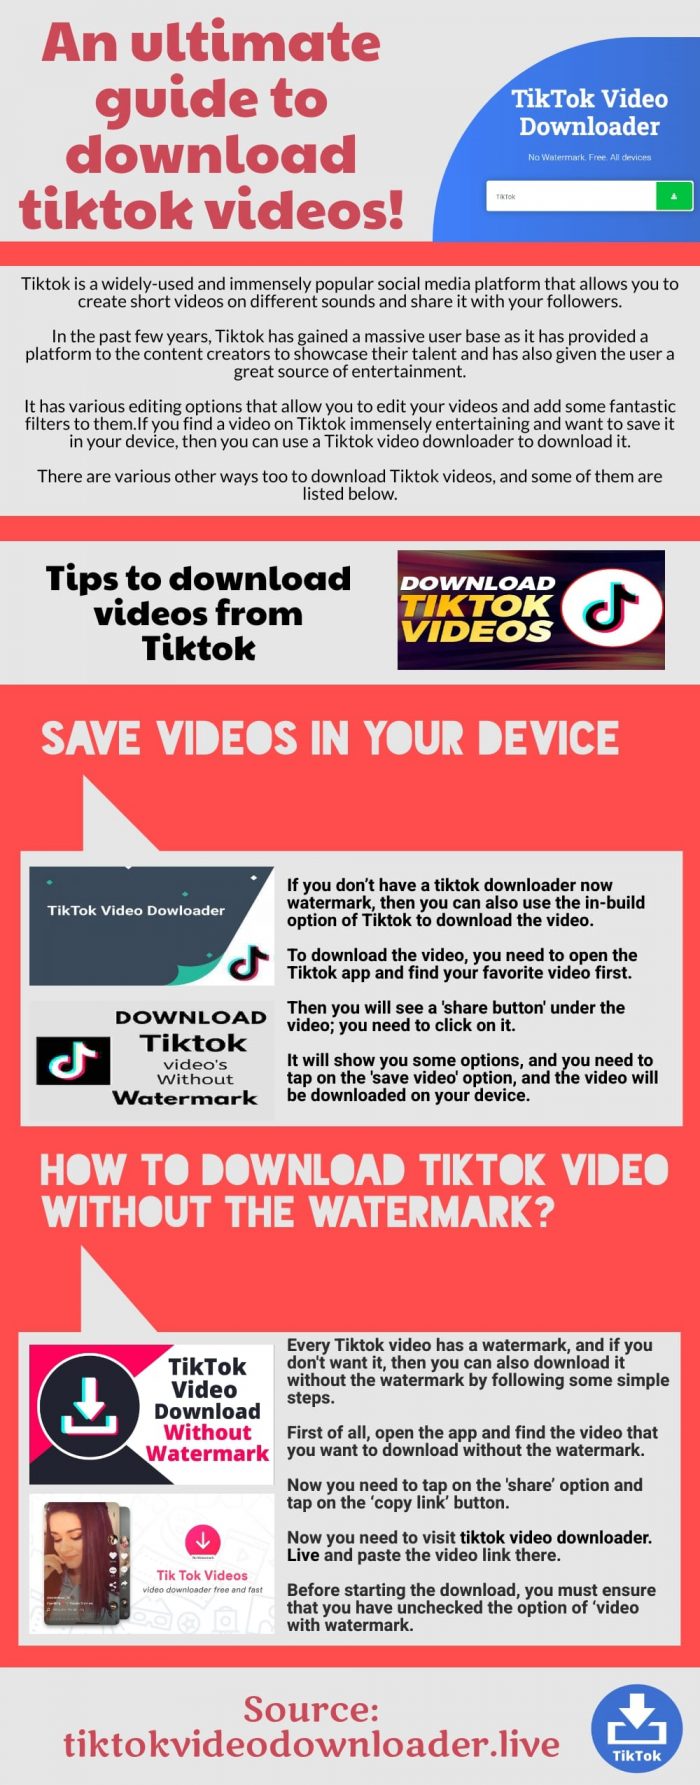 How to download Tiktok video without the watermark?